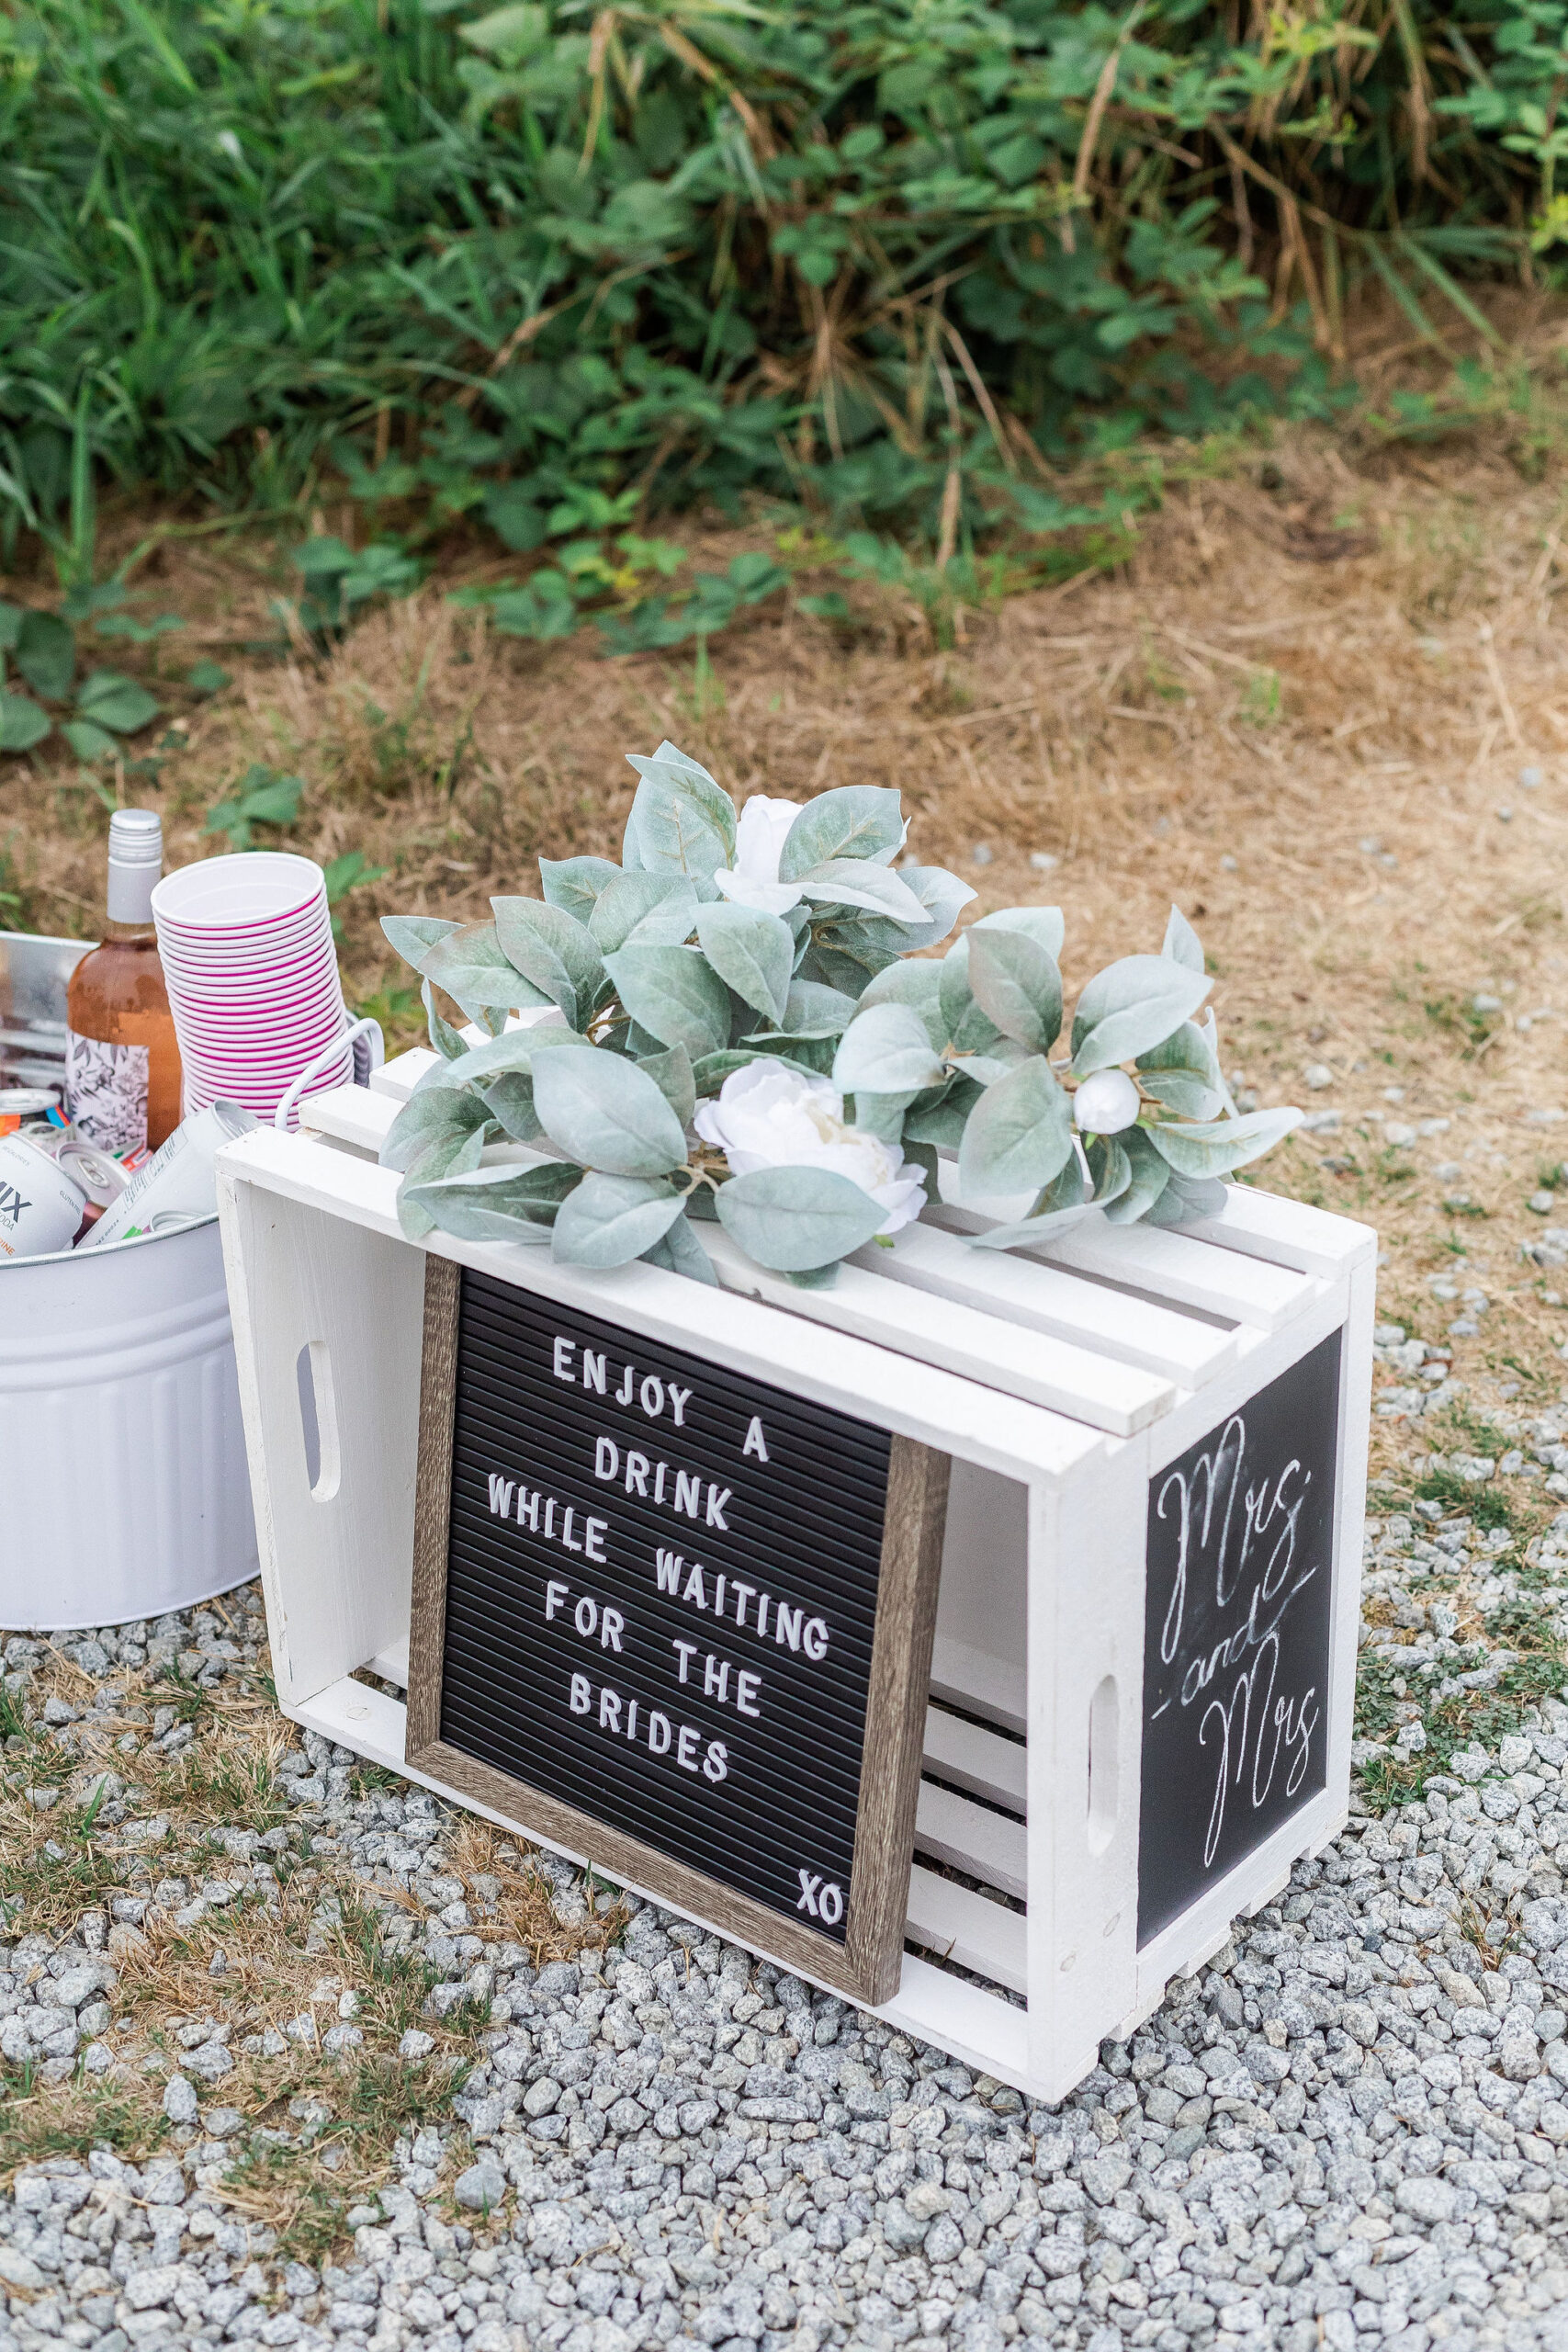 fun ideas for your wedding ceremony like a sign encouraging guests to enjoy a drink before the ceremony that says "enjoy a drink while waiting for the brides" 